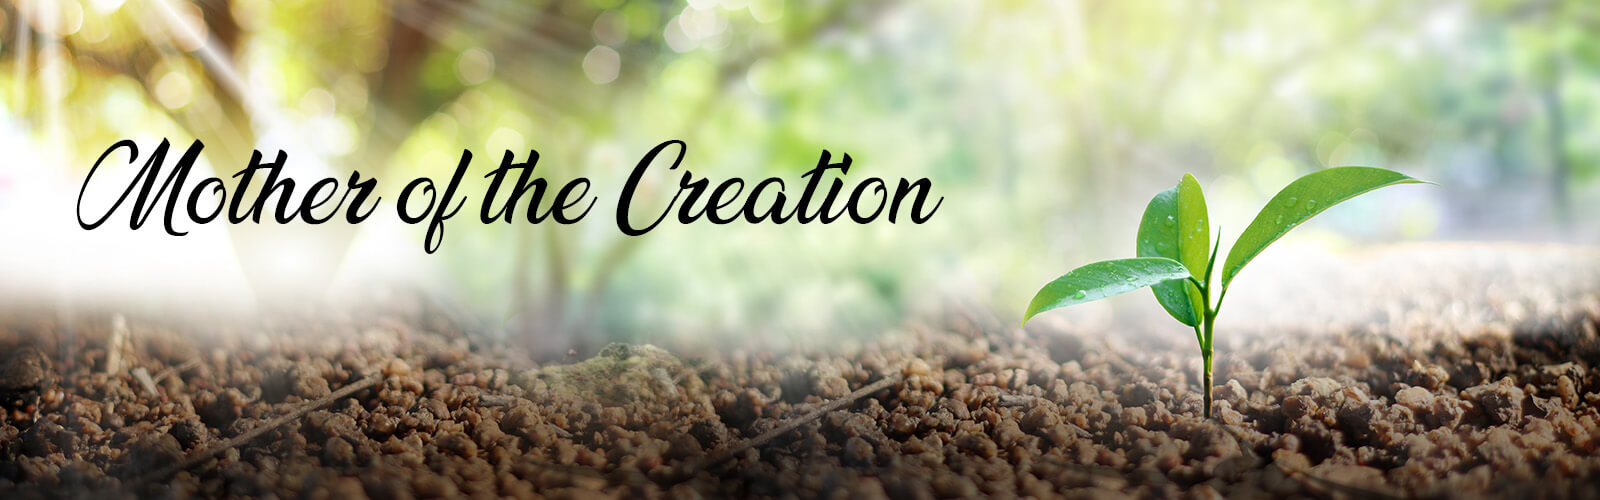 Mothers Day- Mother of the Creation